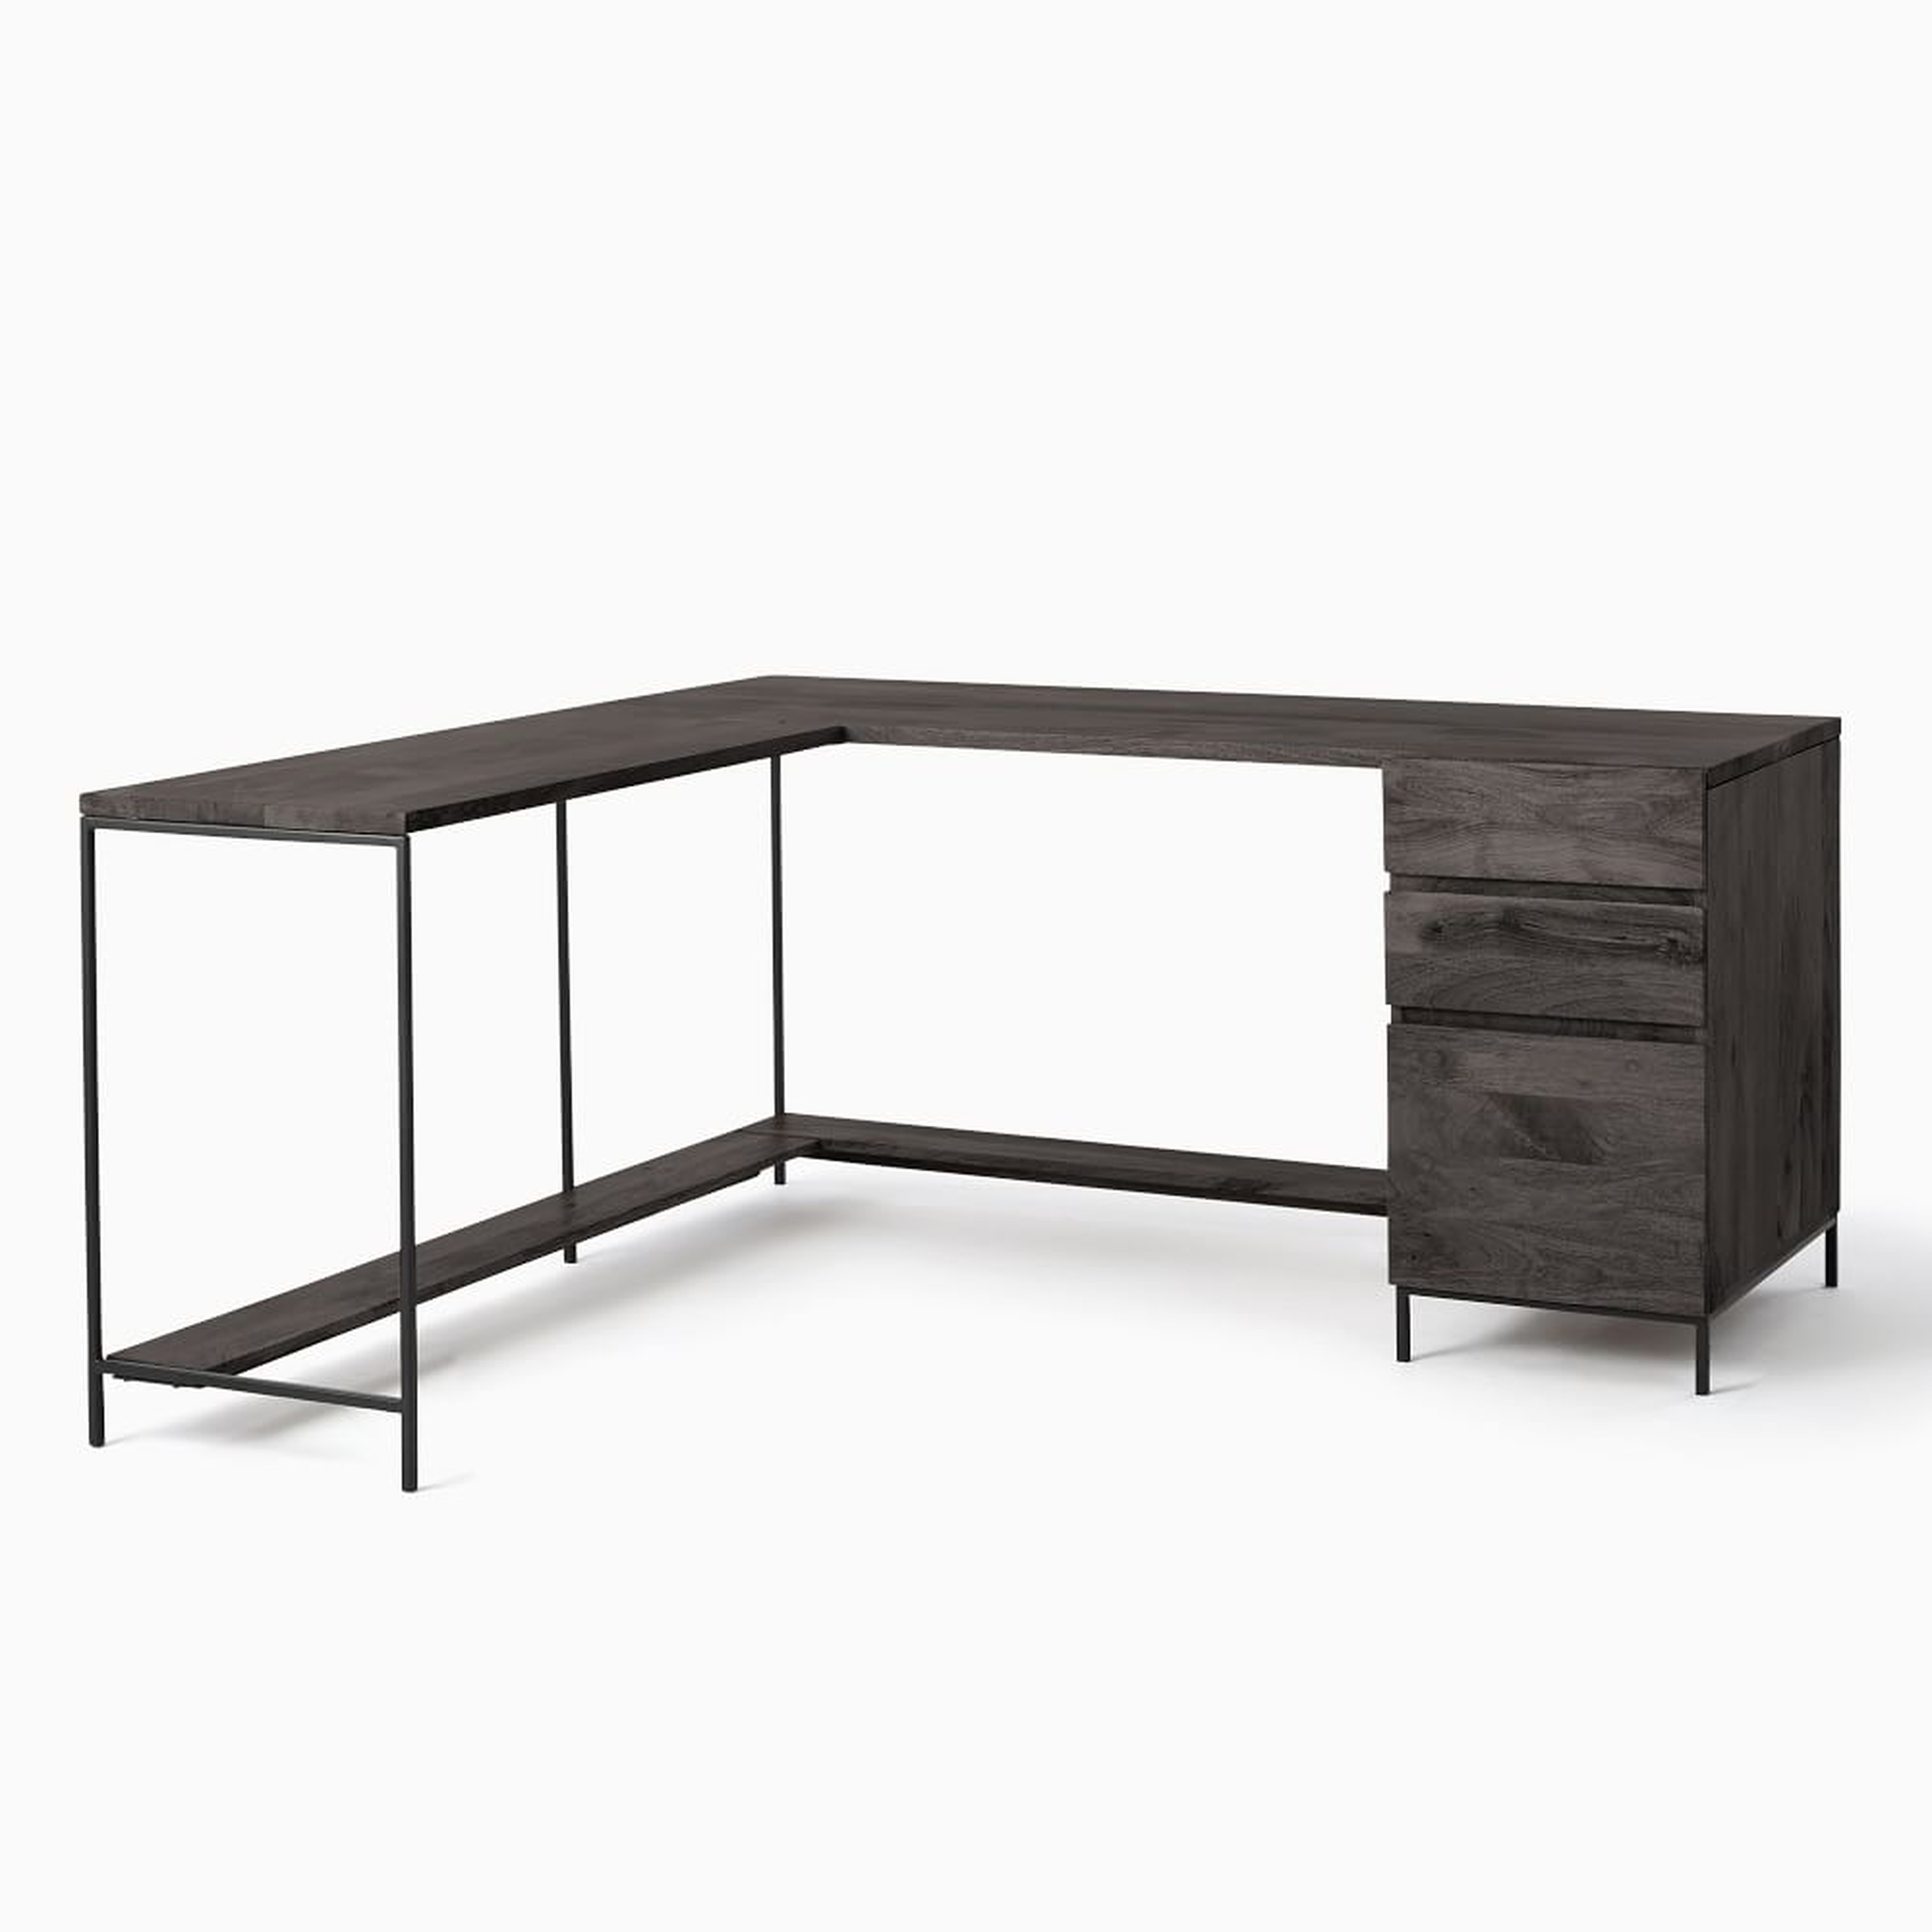 We Industrial Storage Collection Black Set 4 Desk Top And Box File And Return With Shelf - West Elm